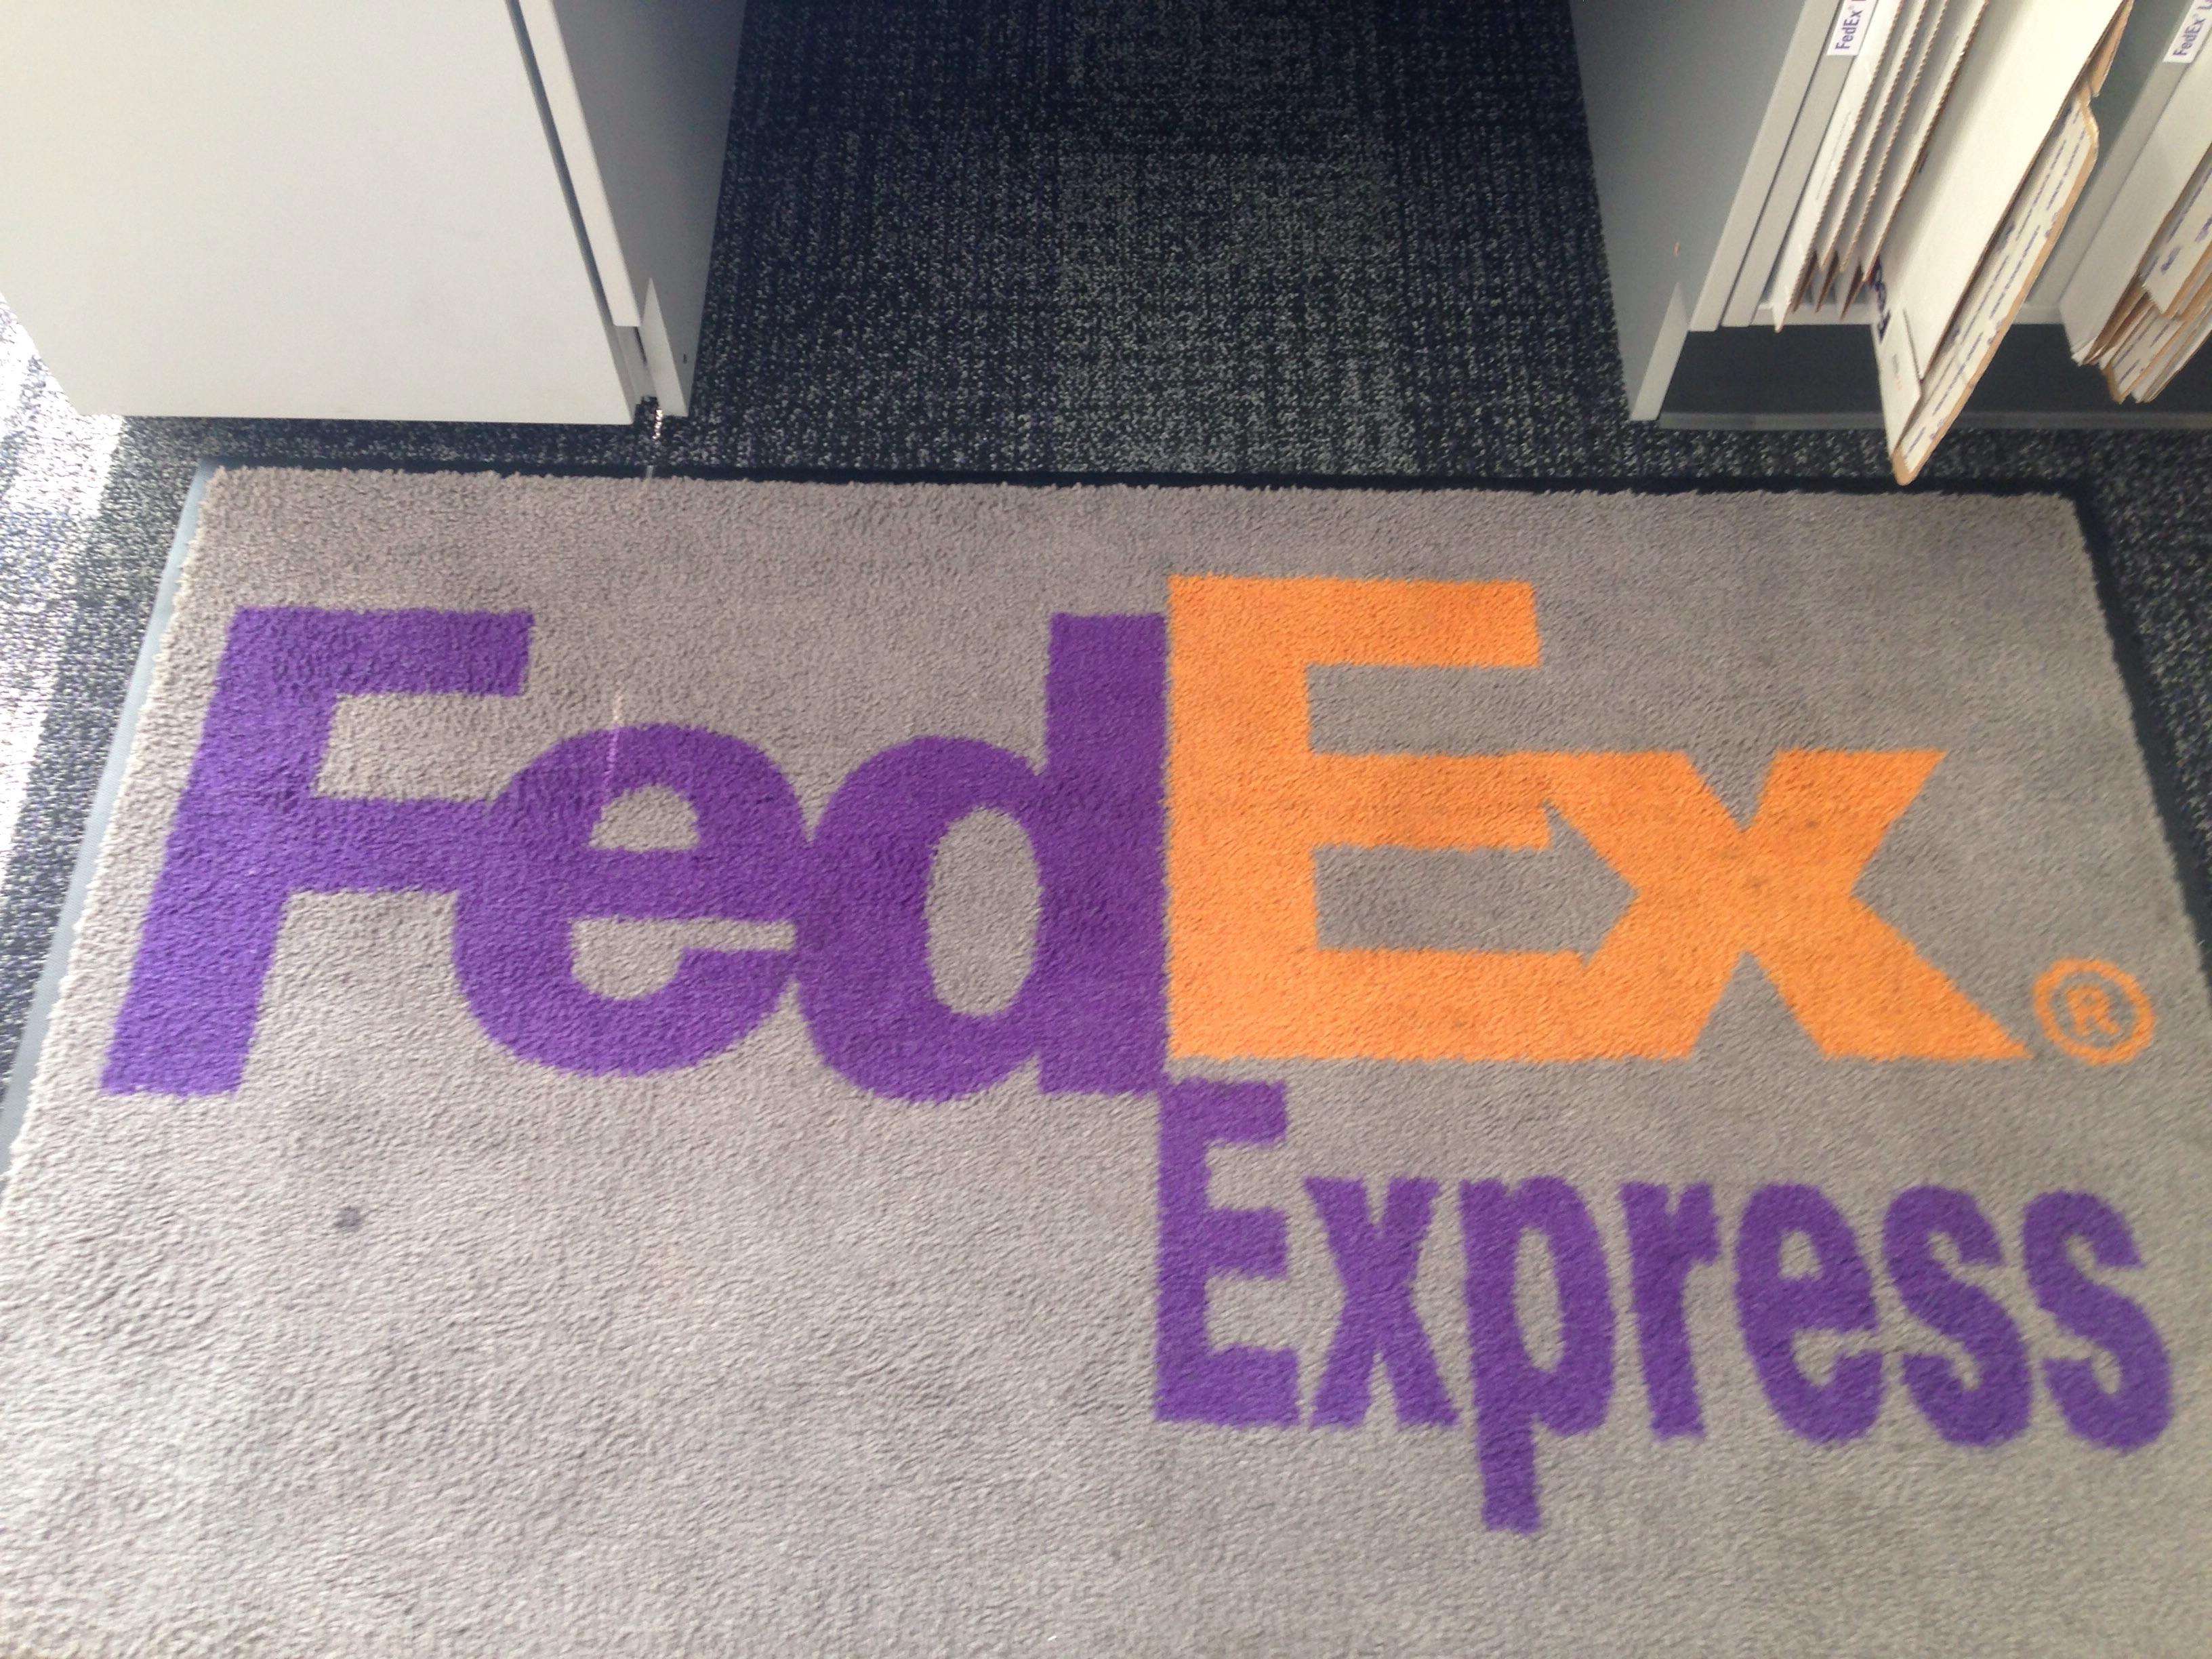 FedEx Official Logo - The Ex Part of this FedEx rug doesn't make the arrow like